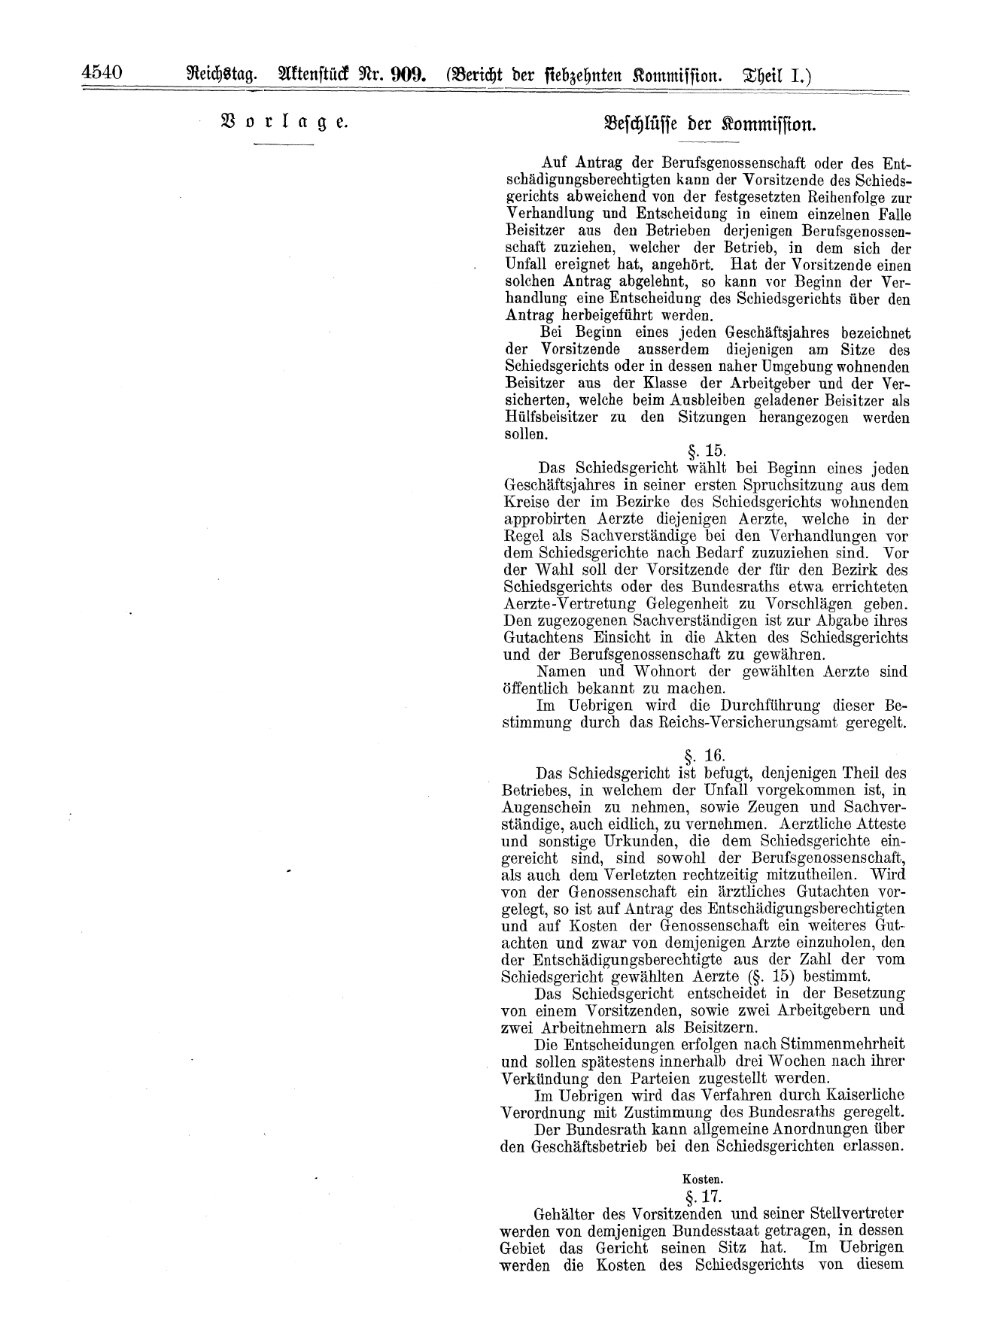 Scan of page 4540